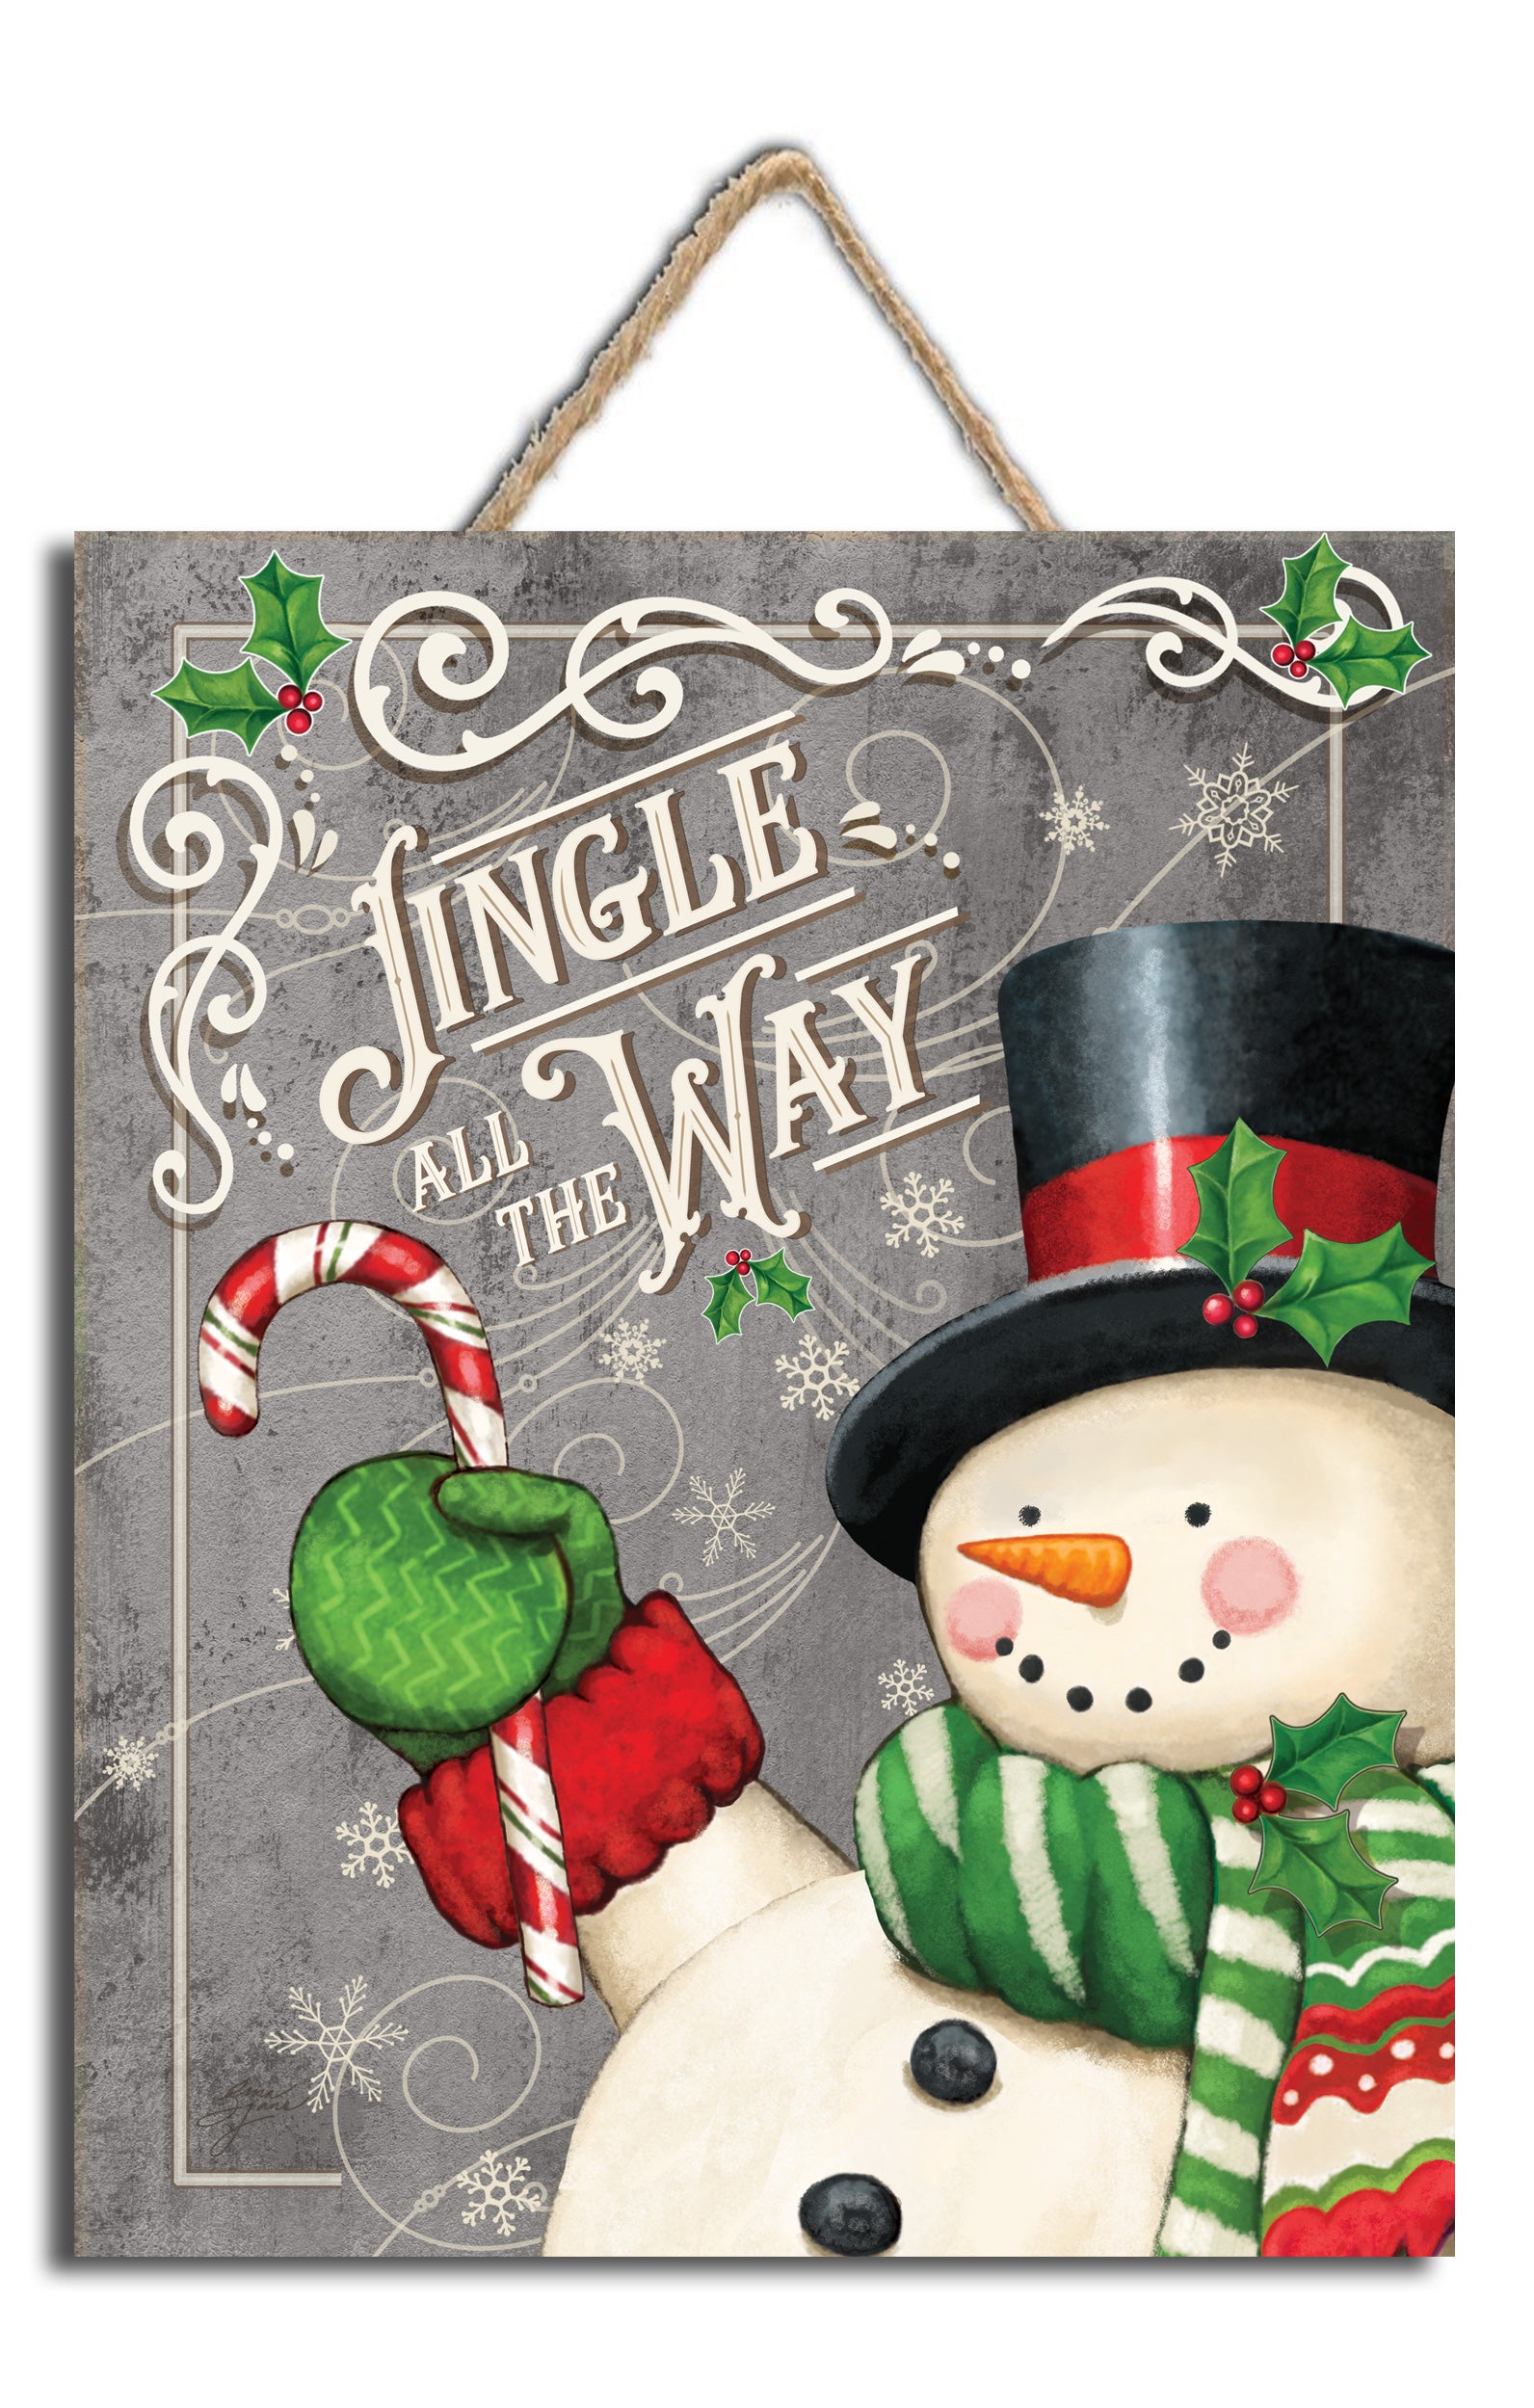 Look no further than our Jingle All the Way Wooden Sign with Rope Hanger! This delightful art piece features a cheerful snowman holding a giant candy cane, the sign reads "Jingle All the Way."